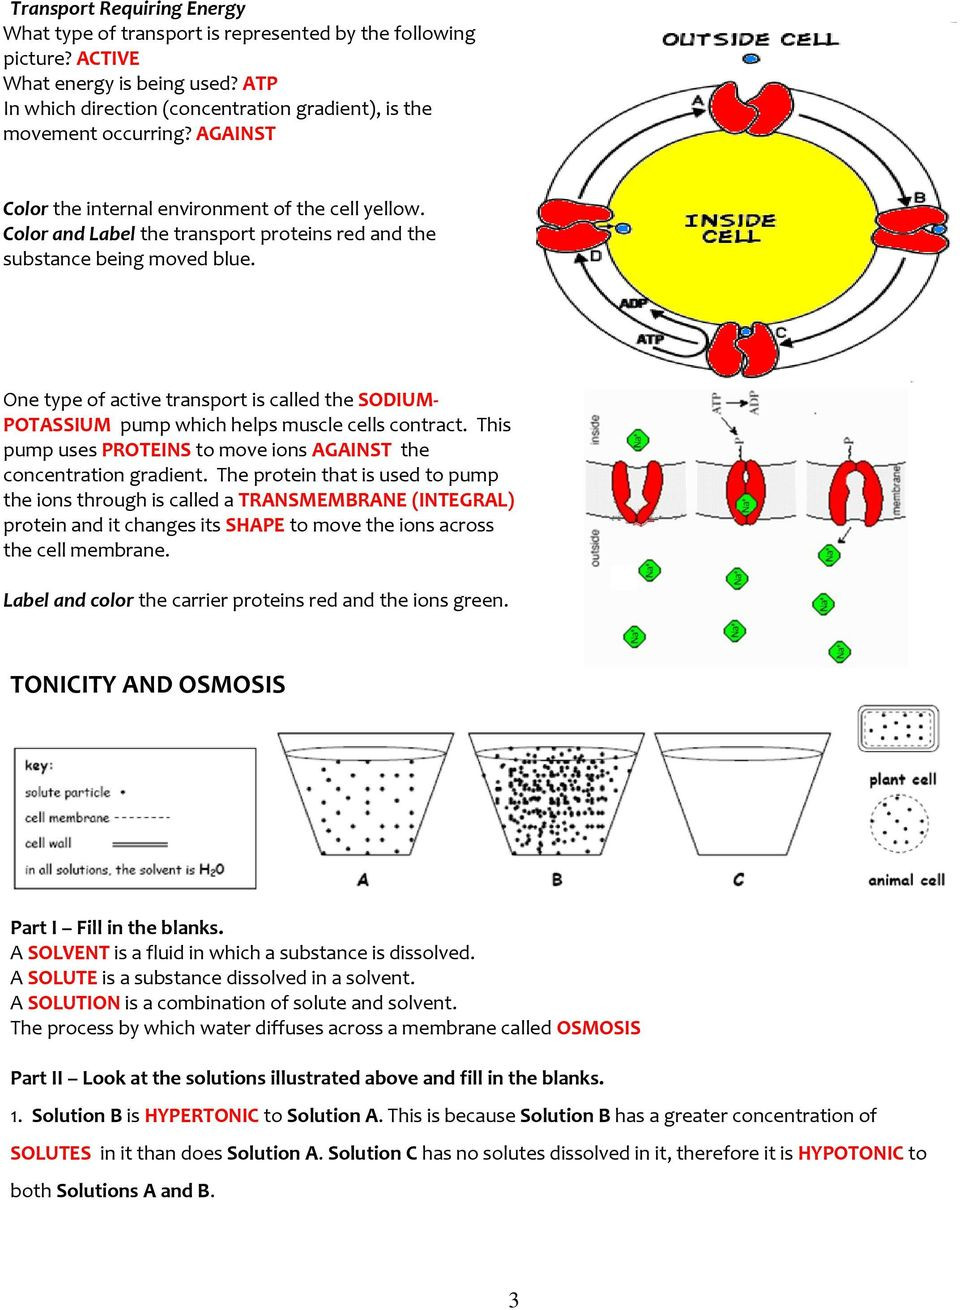 Osmosis and tonicity Worksheet Cell Membrane &amp; tonicity Worksheet Pdf Free Download